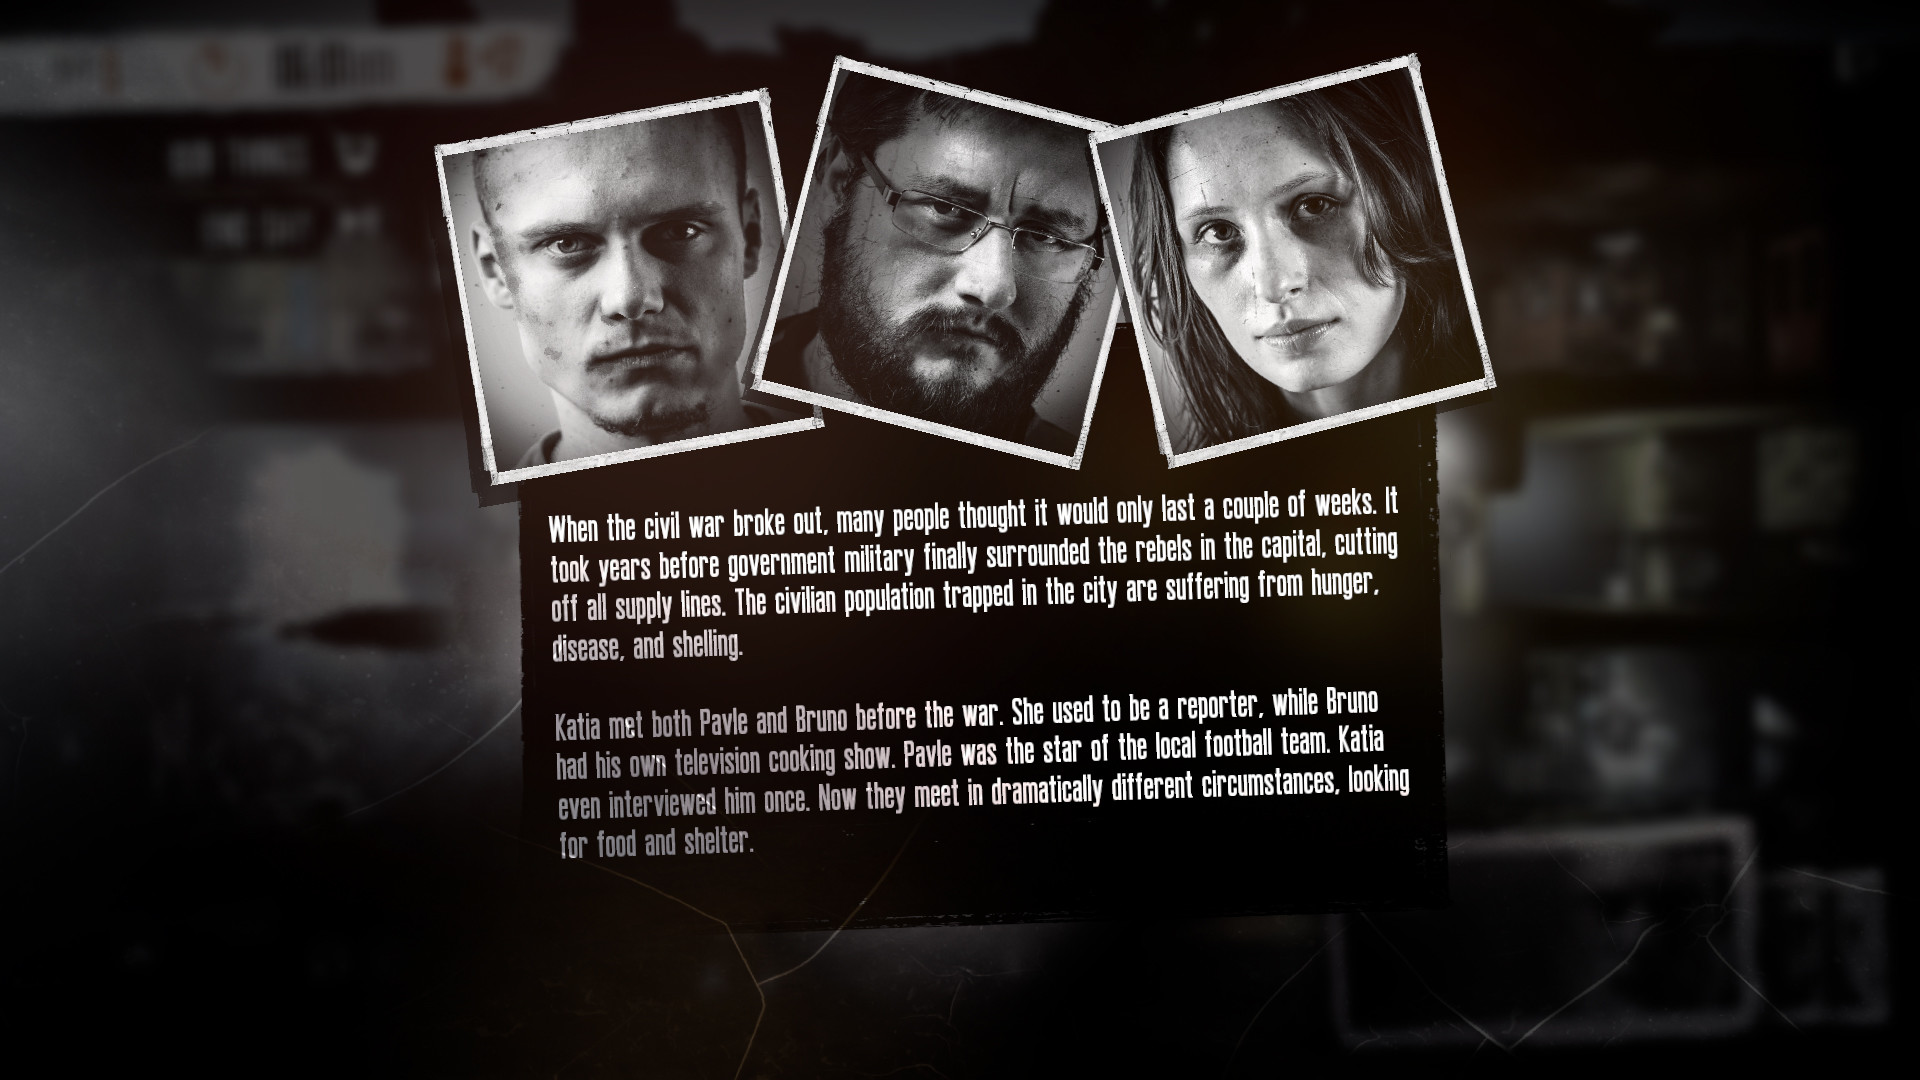 download this war of mine steam for free